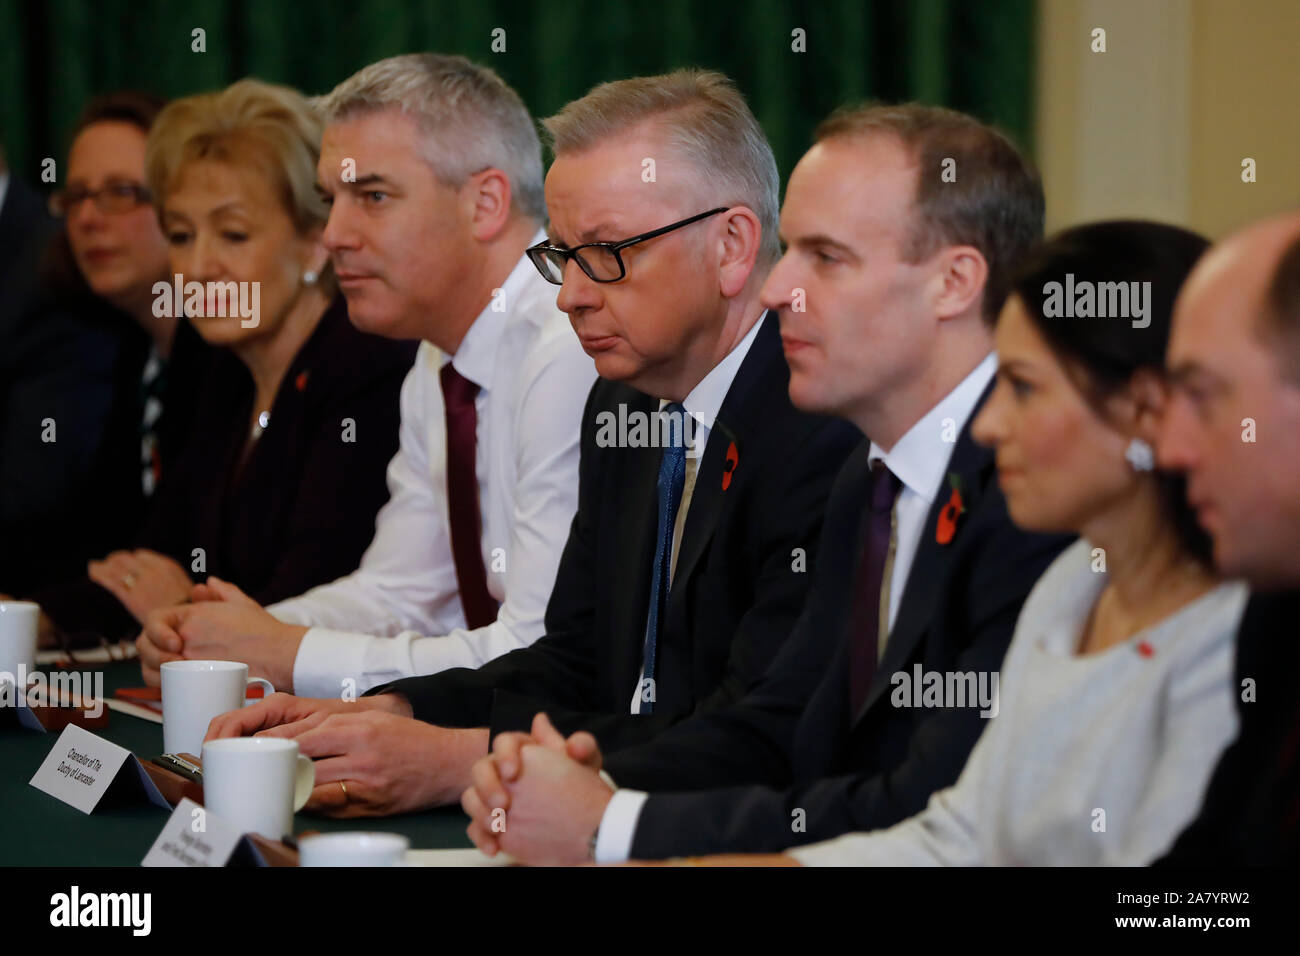 Cabinet Members Listen To Prime Minister Boris Johnson During A